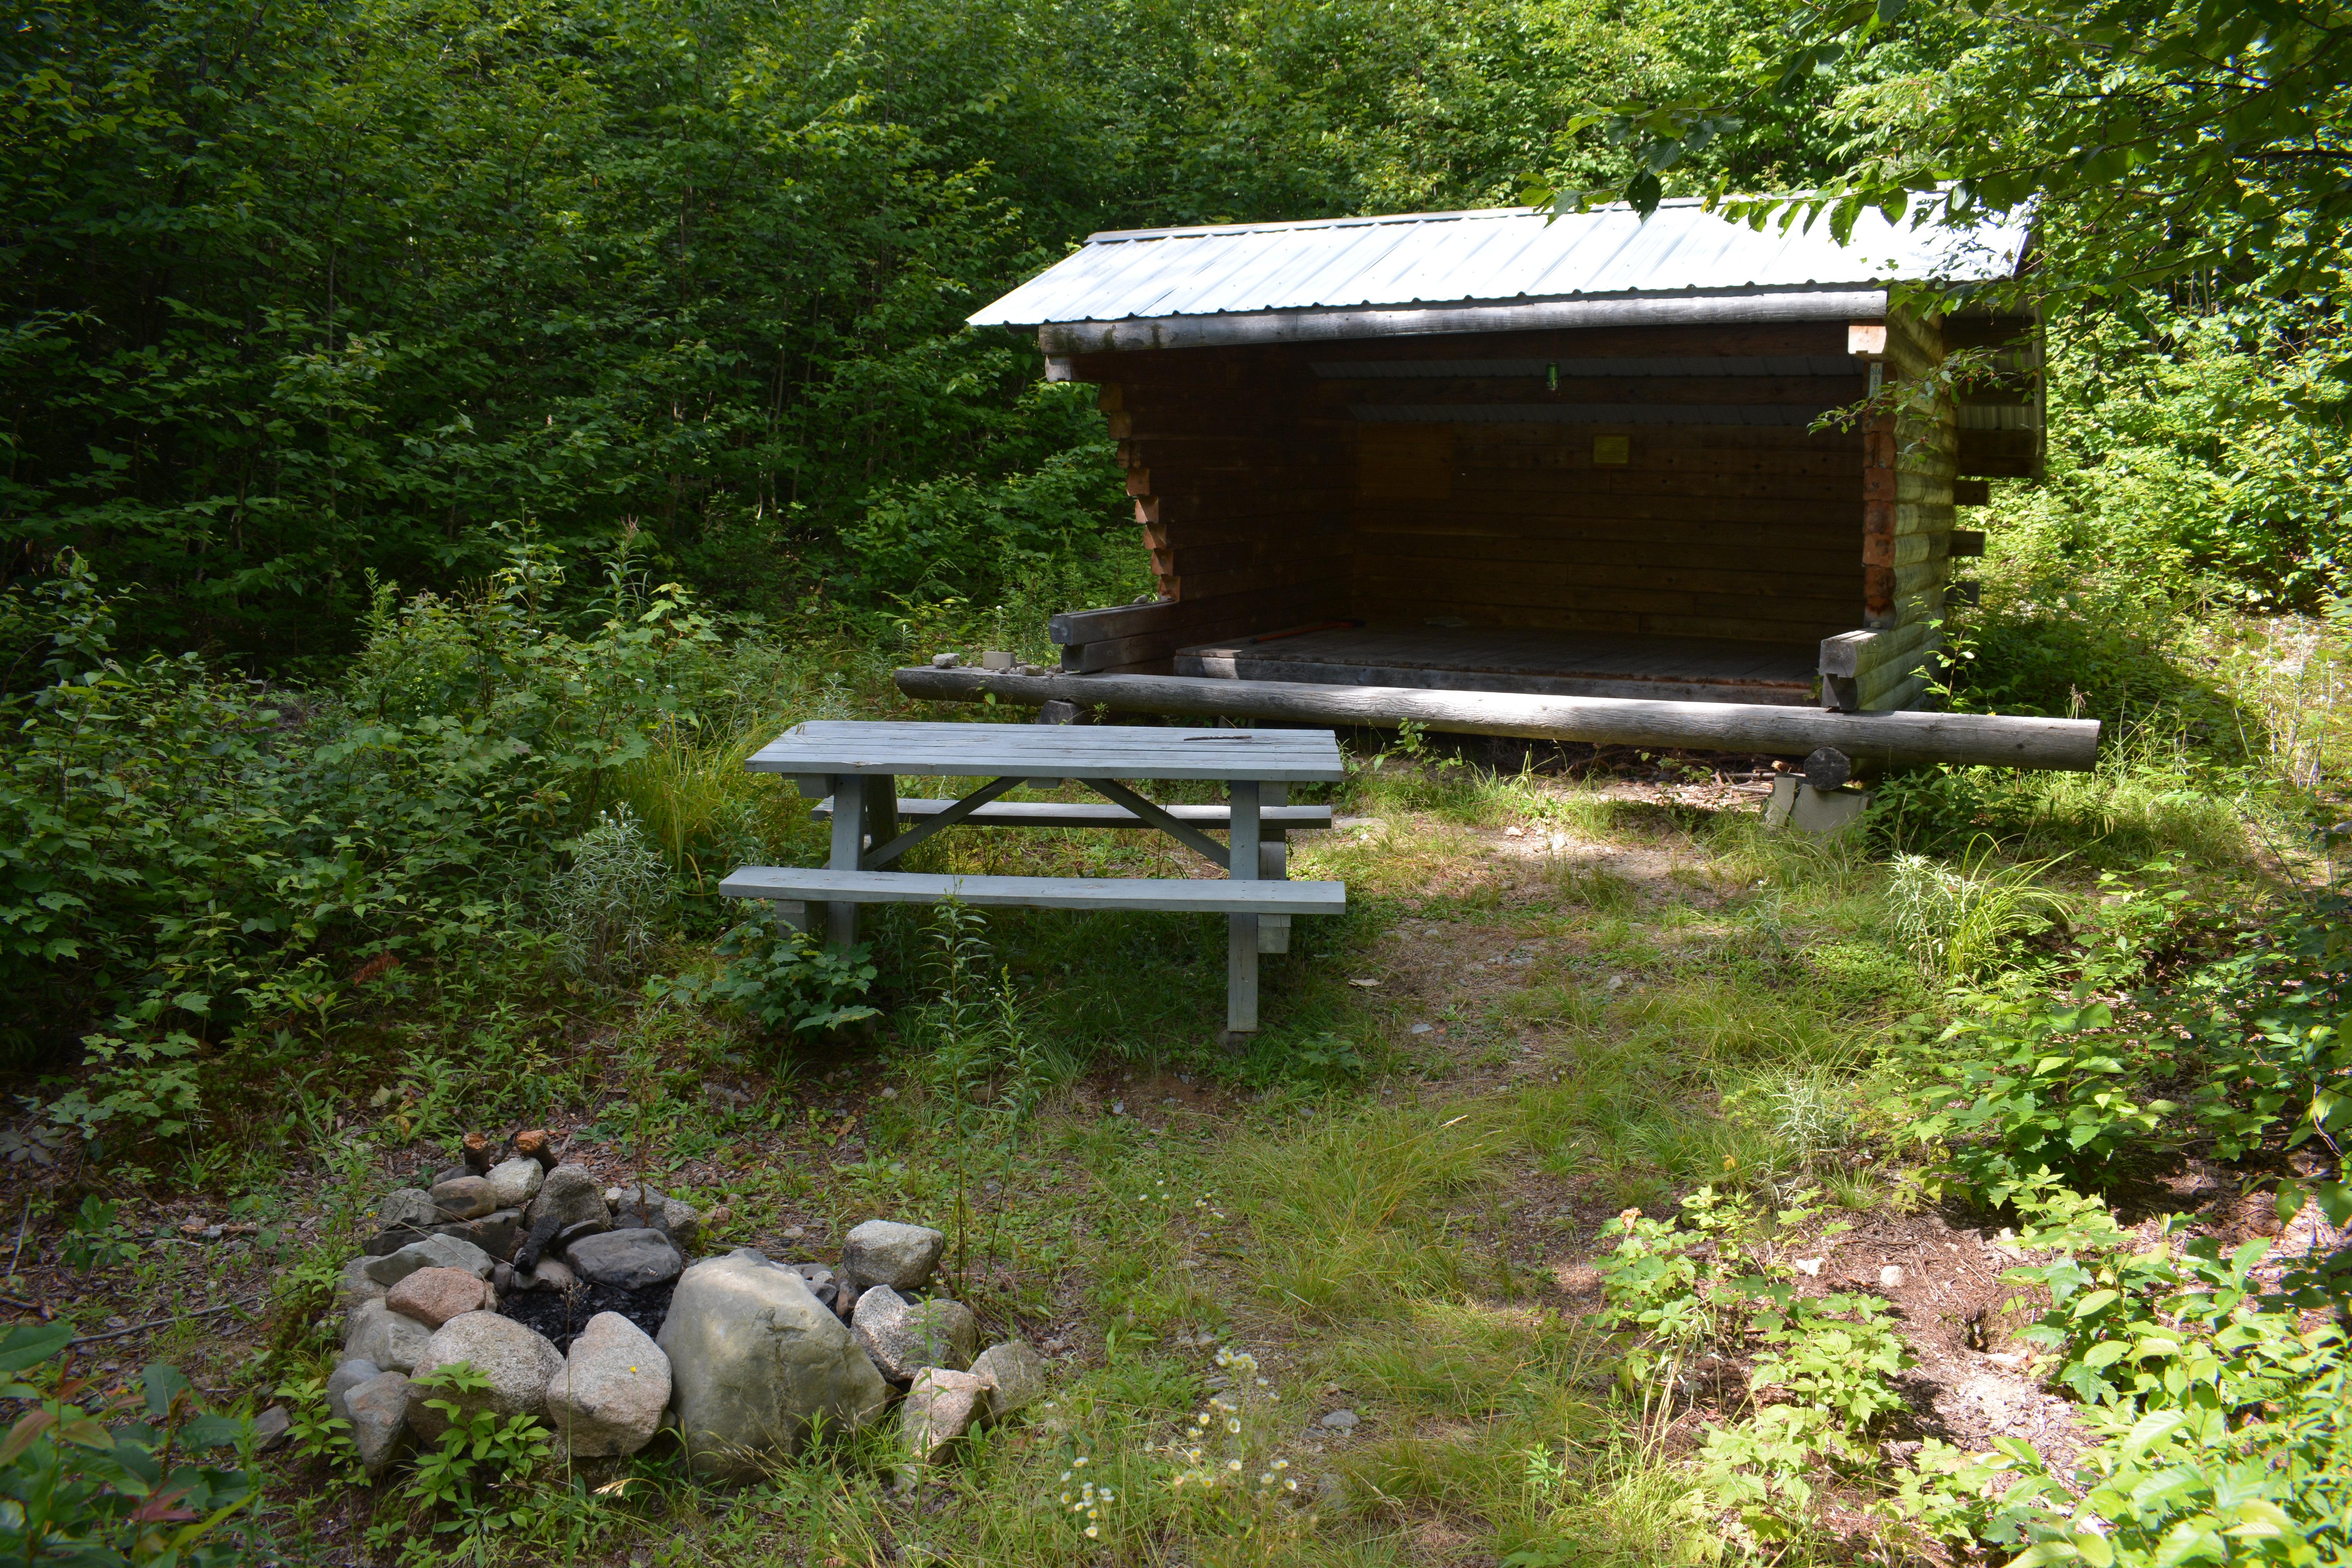 A rustic stone firepit in front of a picnic table and Lean-to. Surrounded by trees and shrubs.